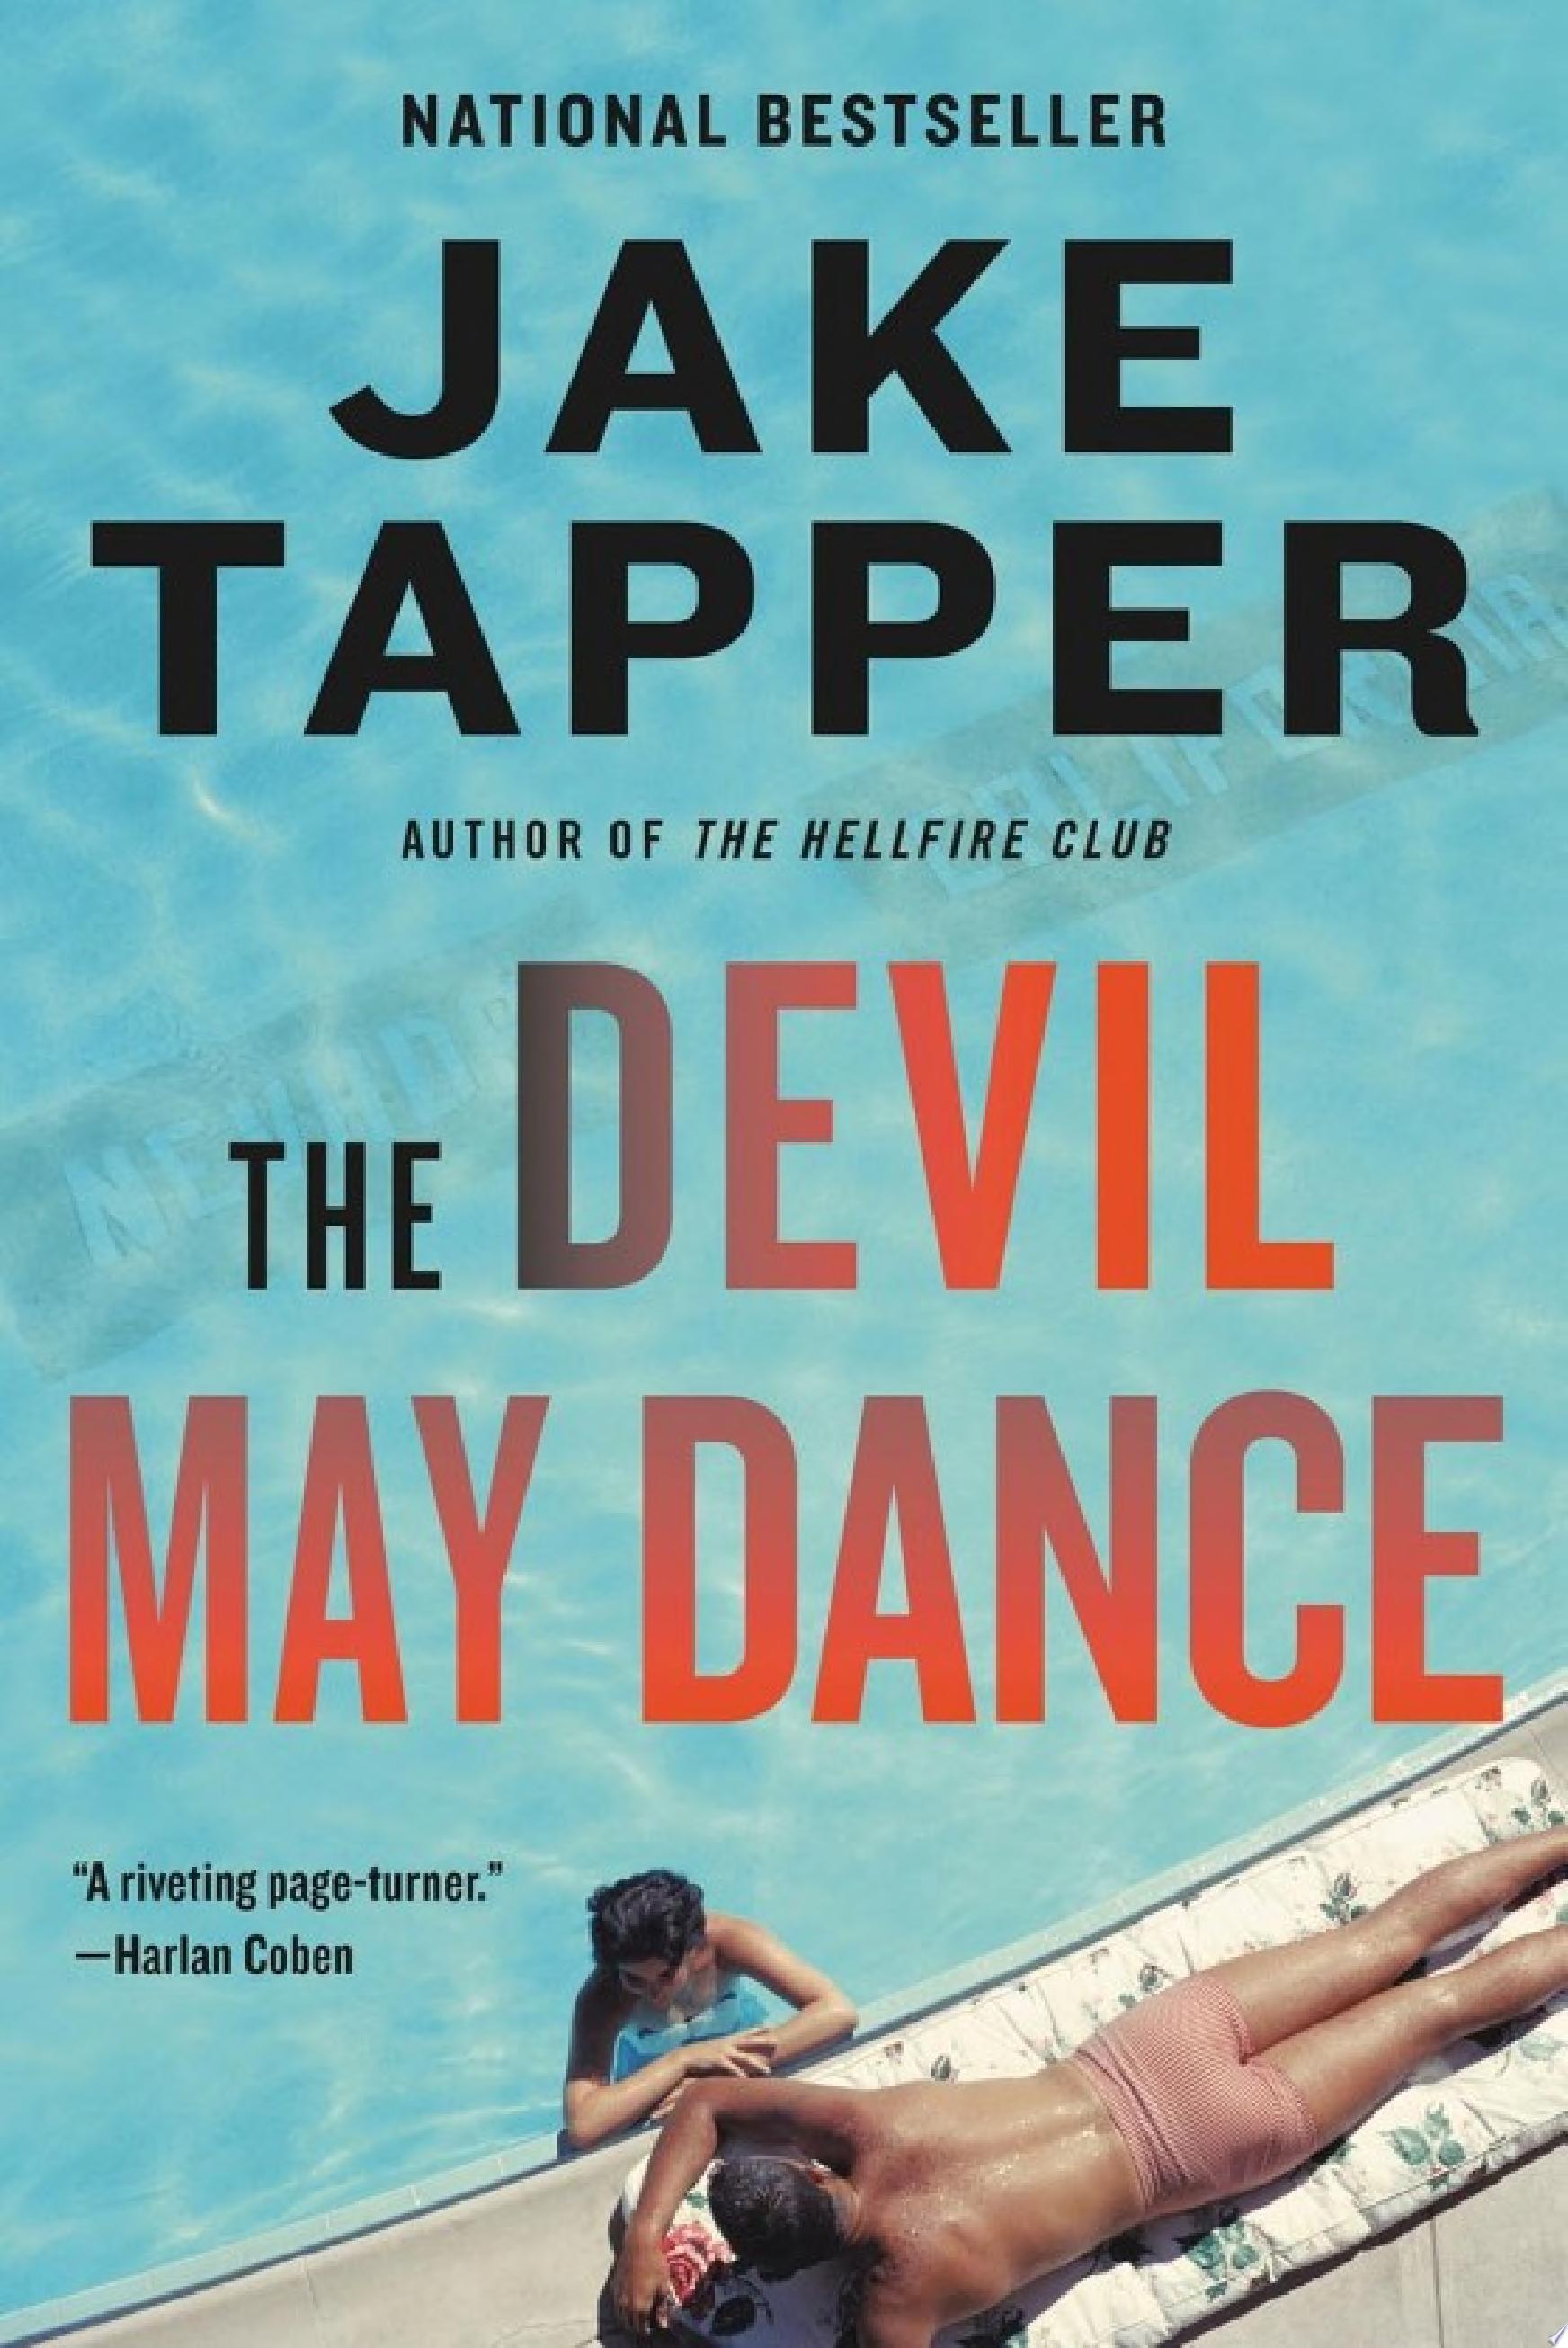 Image for "The Devil May Dance"